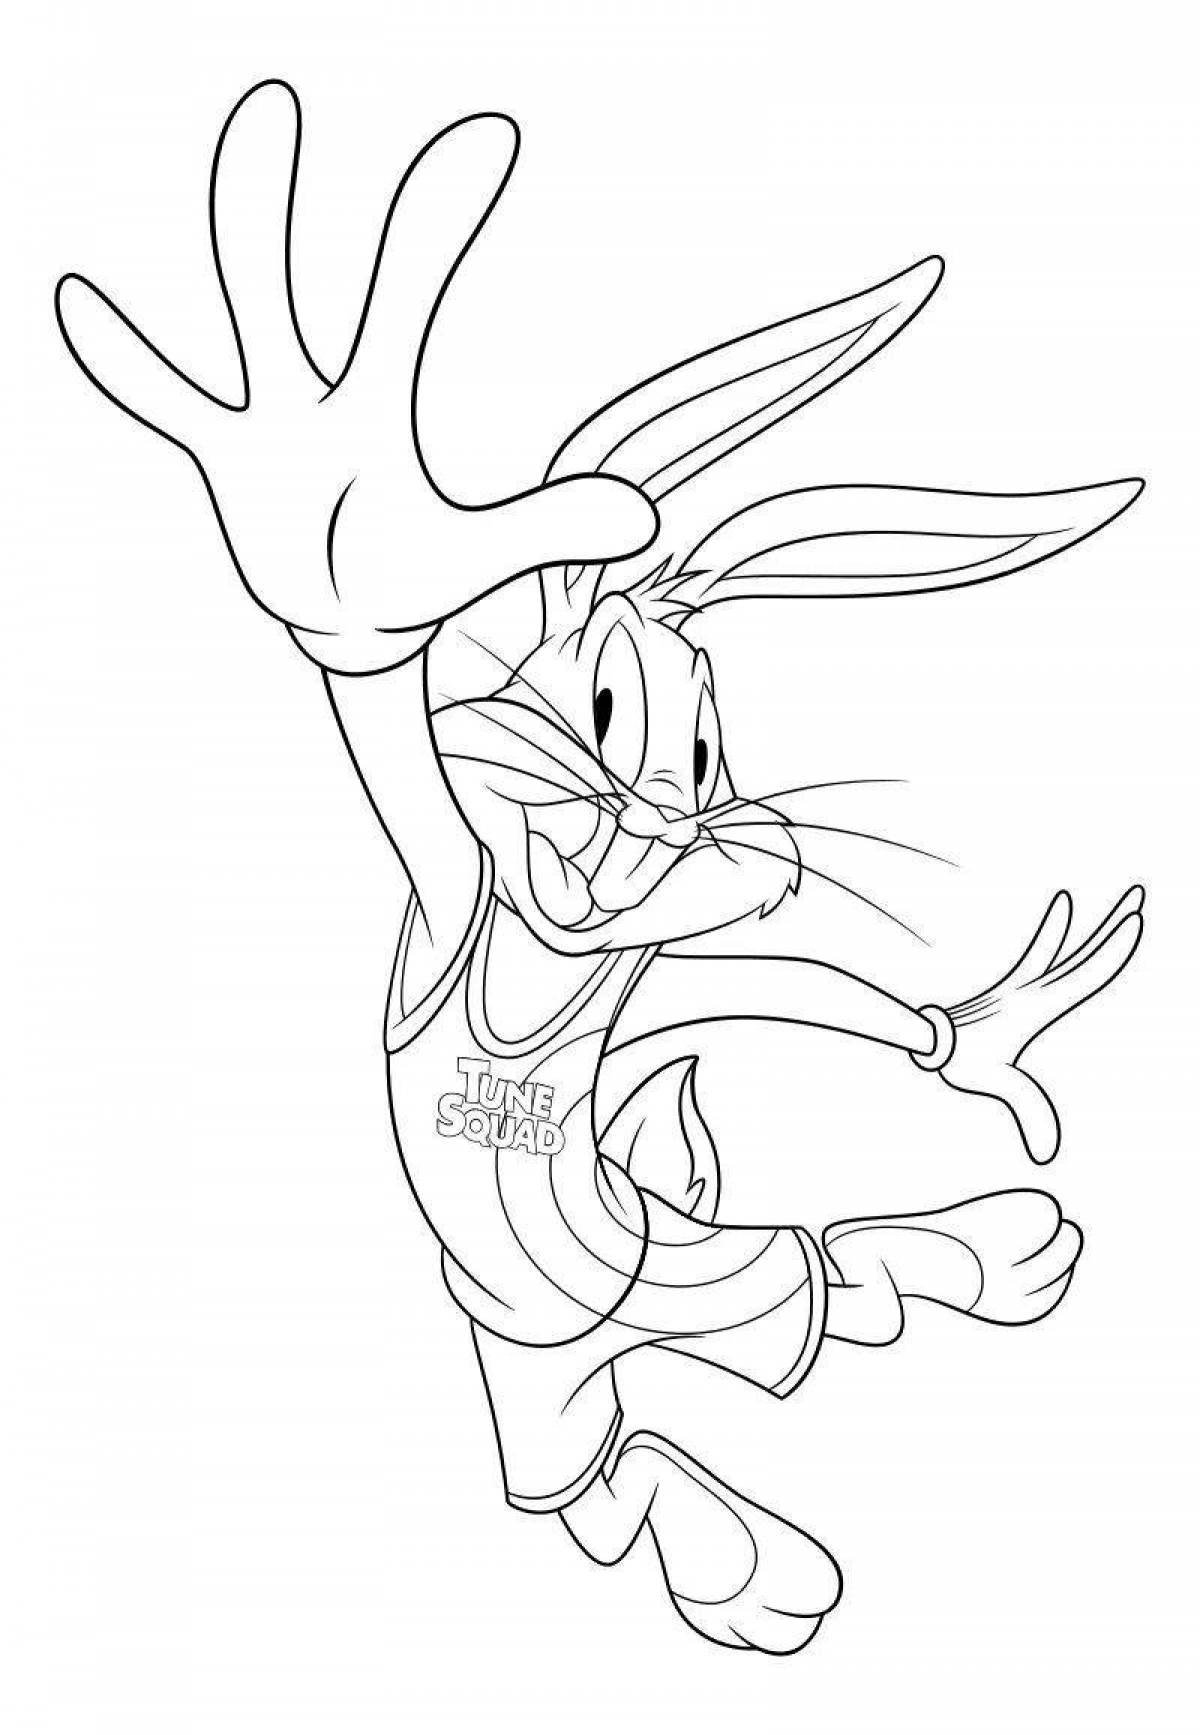 Bunny bugs cute coloring pages